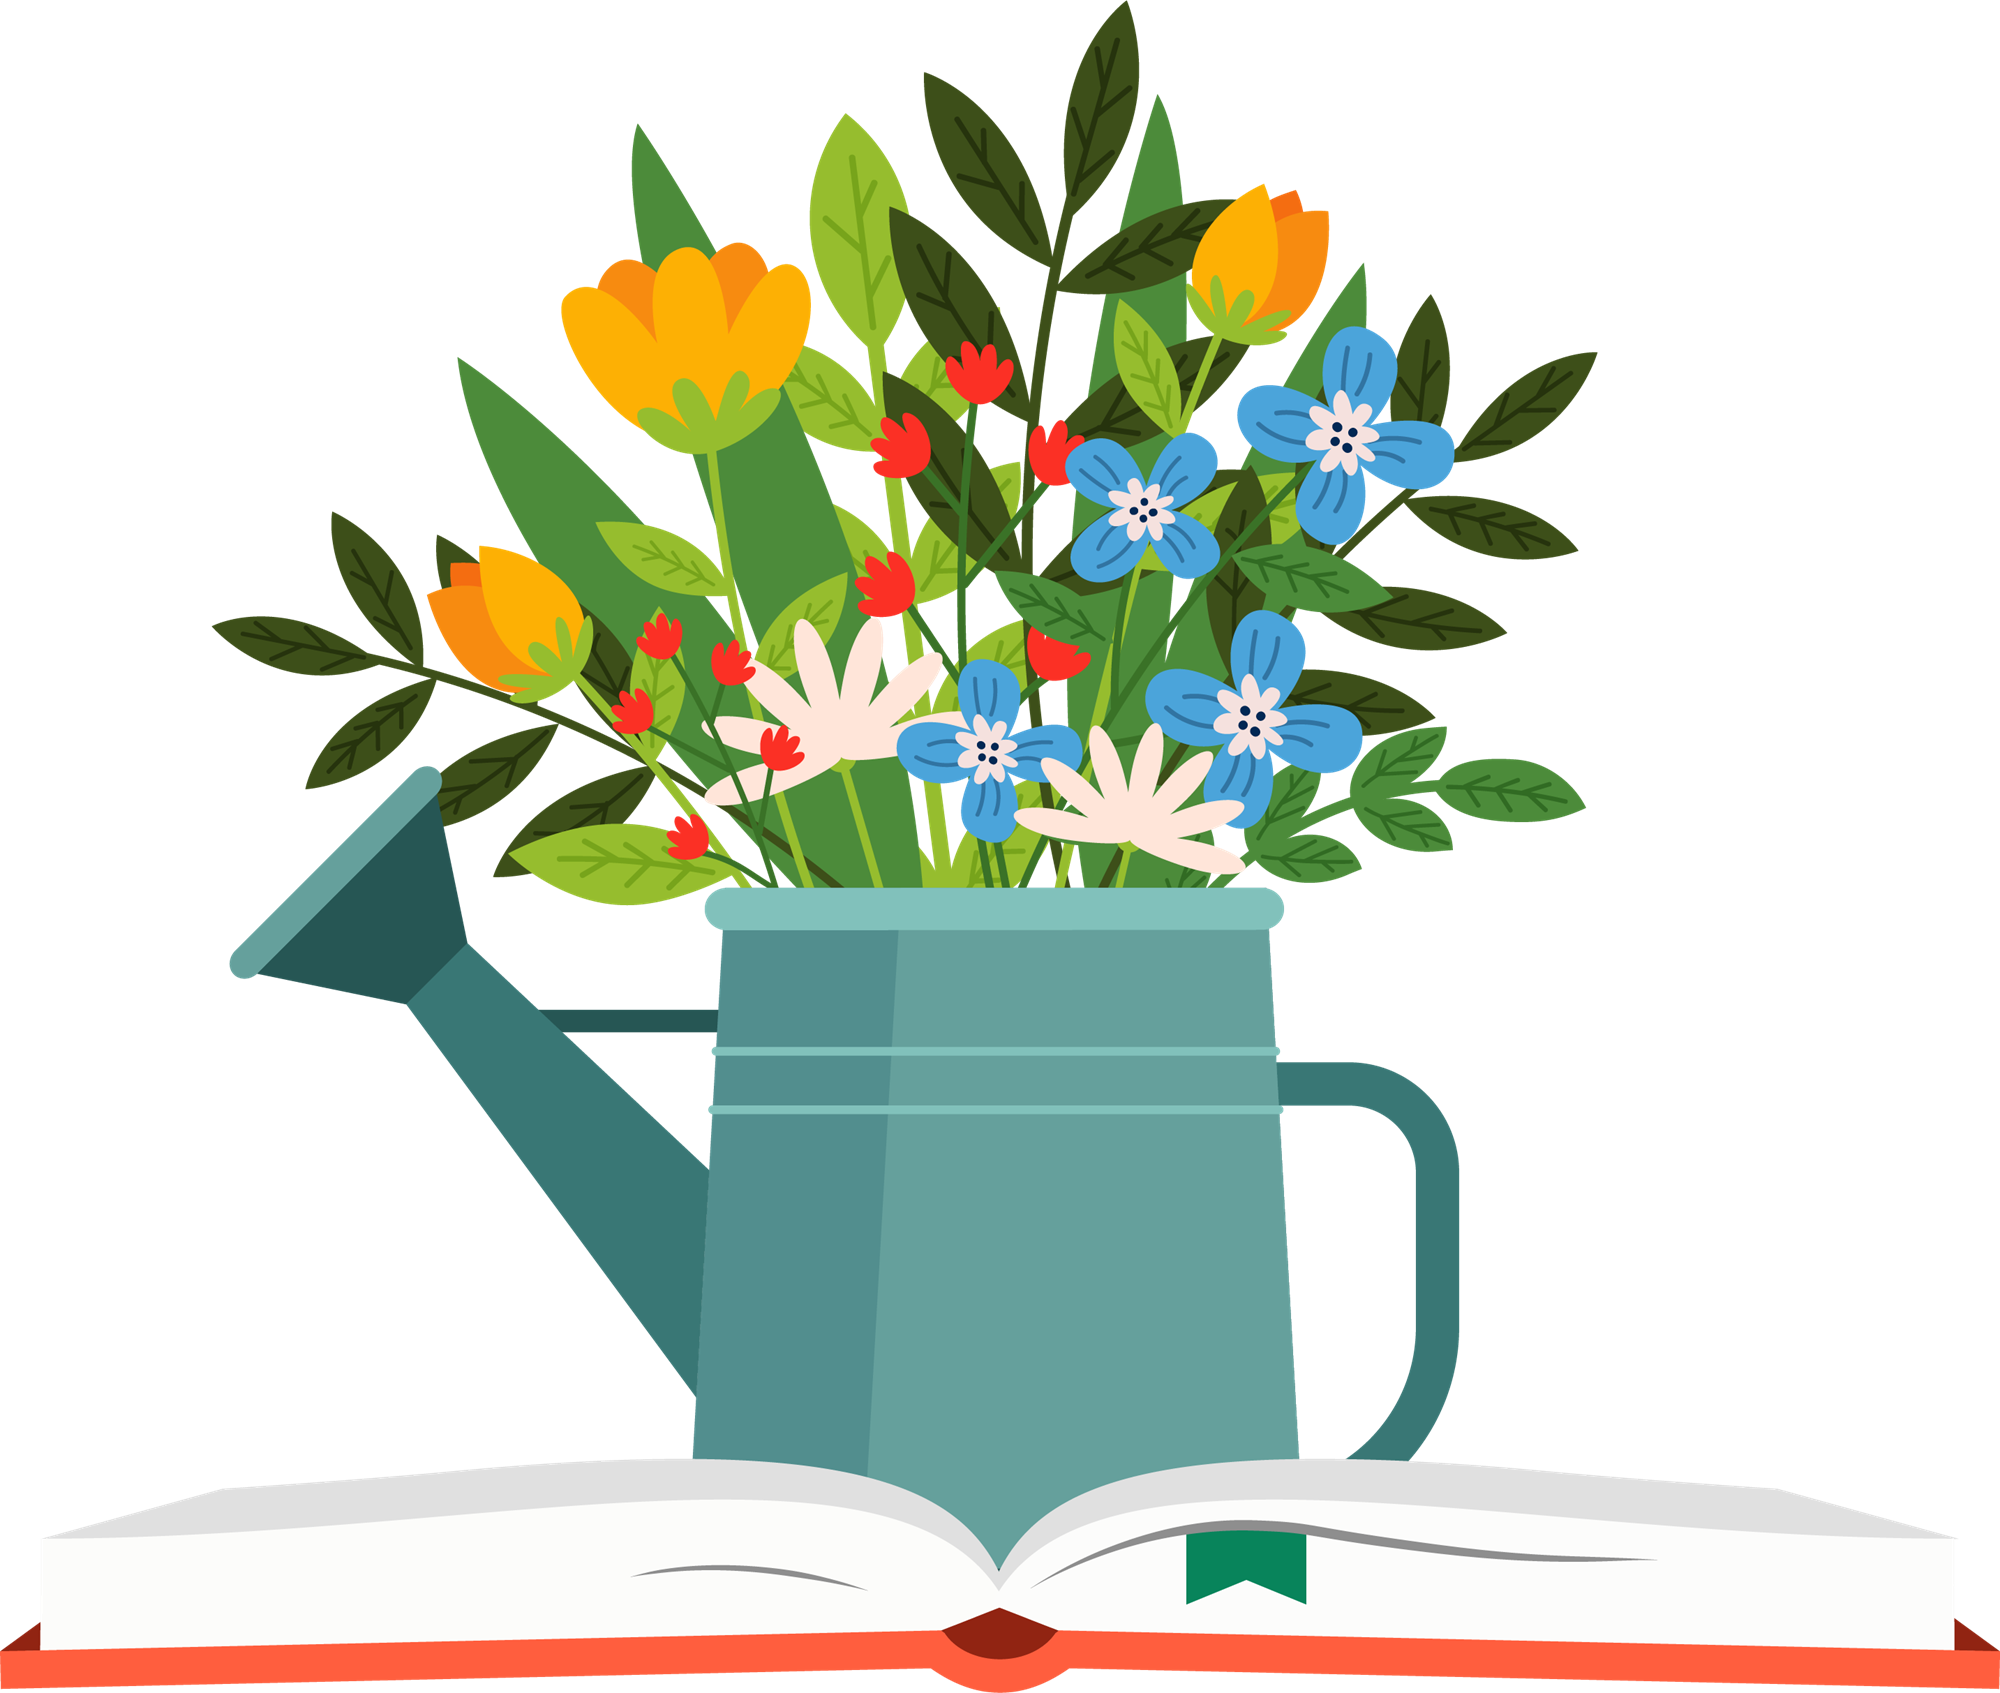 A book is lying open flat. On top of the book is a blue watering can with blooming flowers coming out of the top